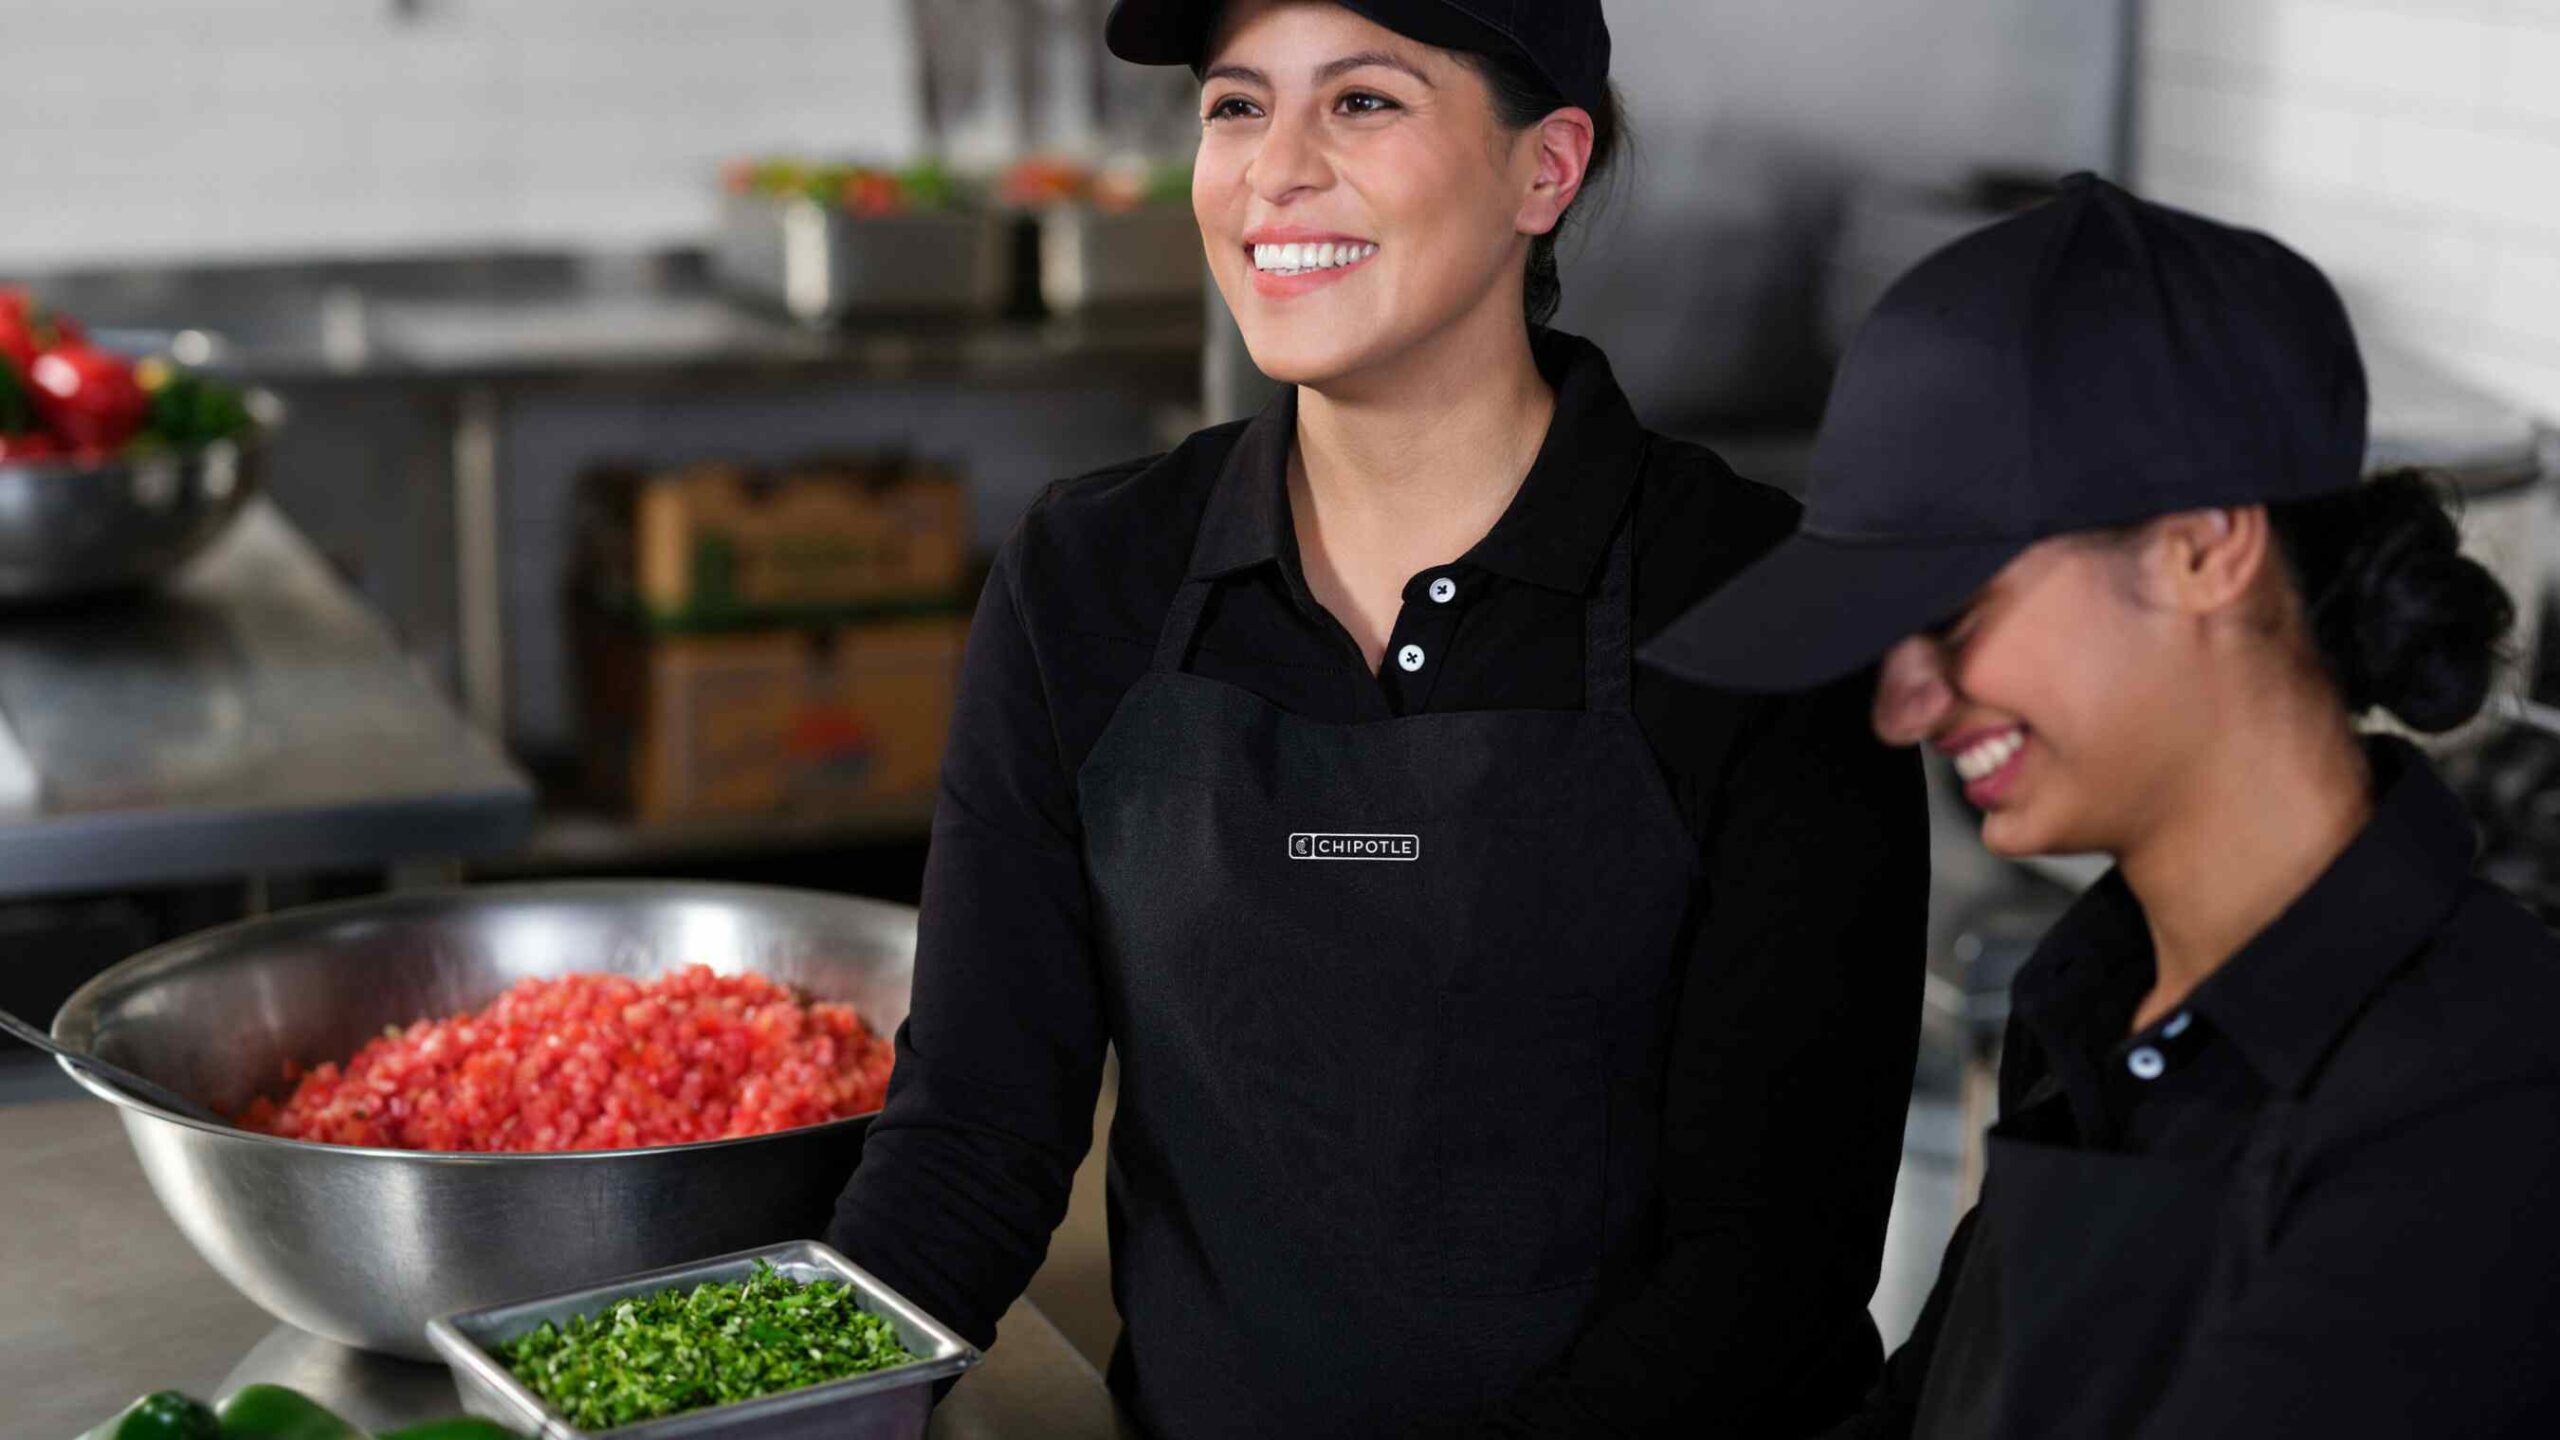 Chipotle_Employee_Assistance_Program-compressed